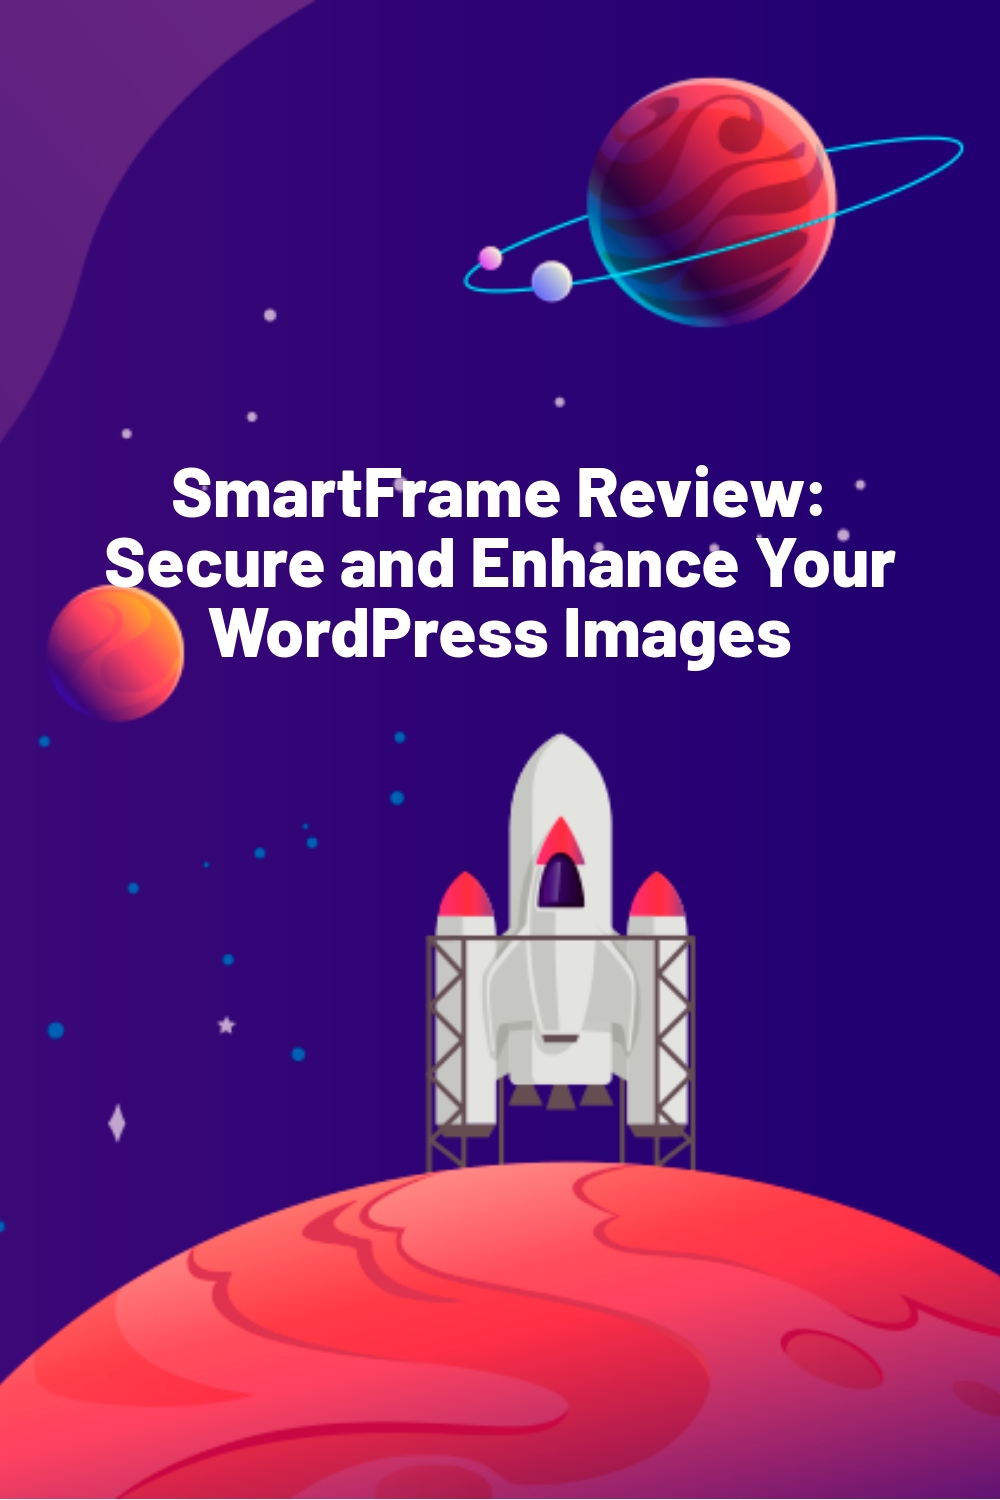 SmartFrame Review: Secure and Enhance Your WordPress Images